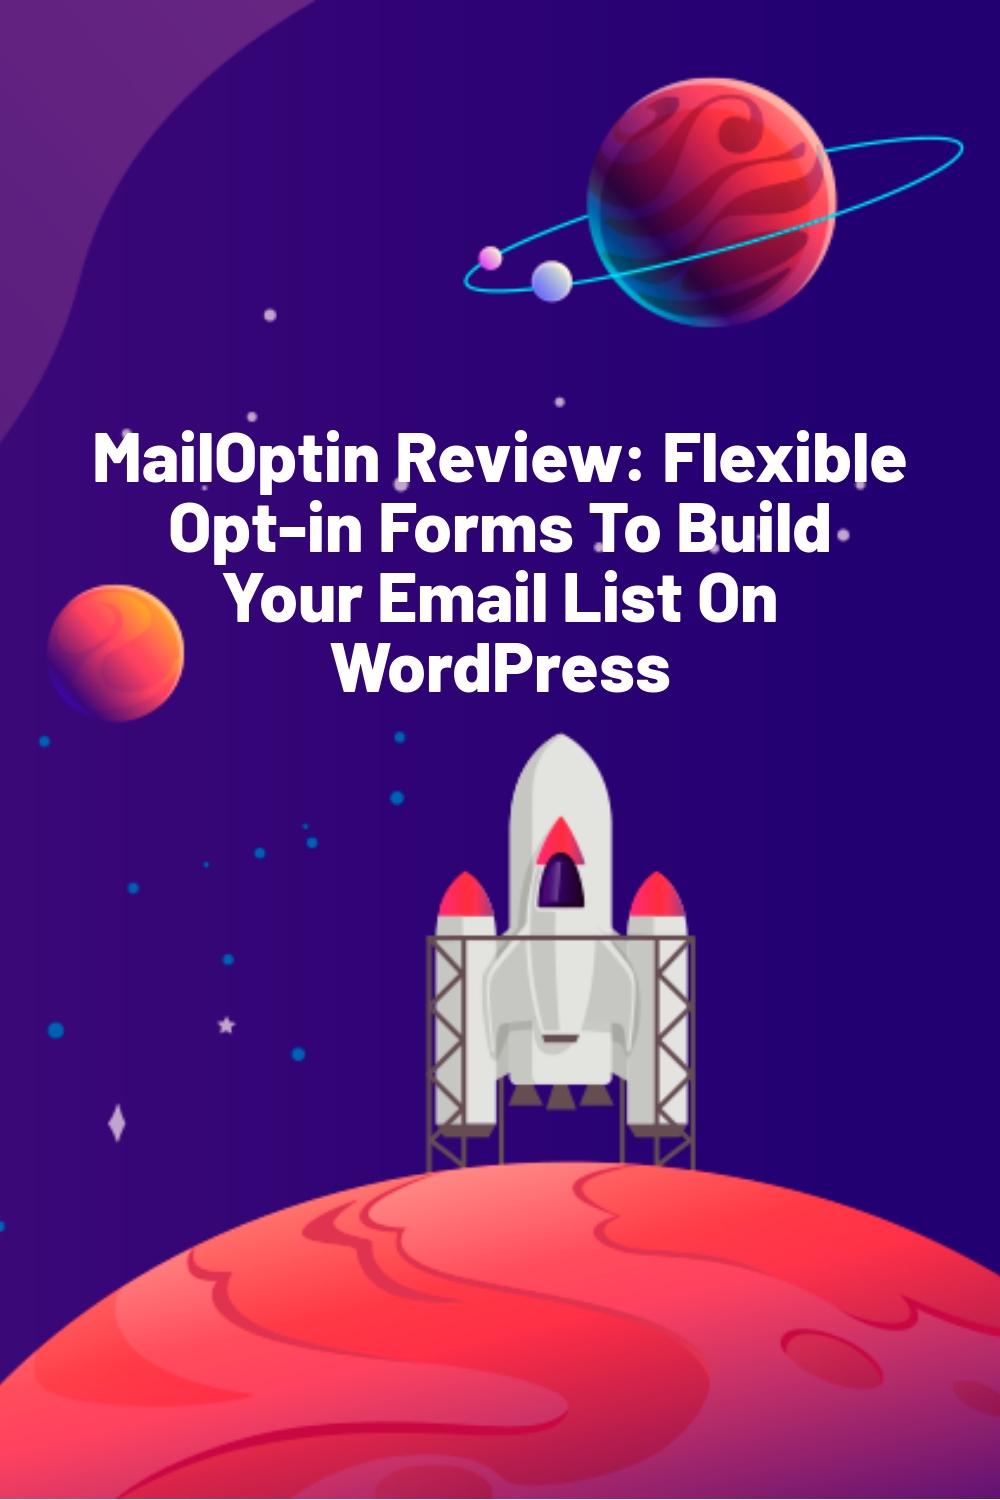 MailOptin Review: Flexible Opt-in Forms To Build Your Email List On WordPress